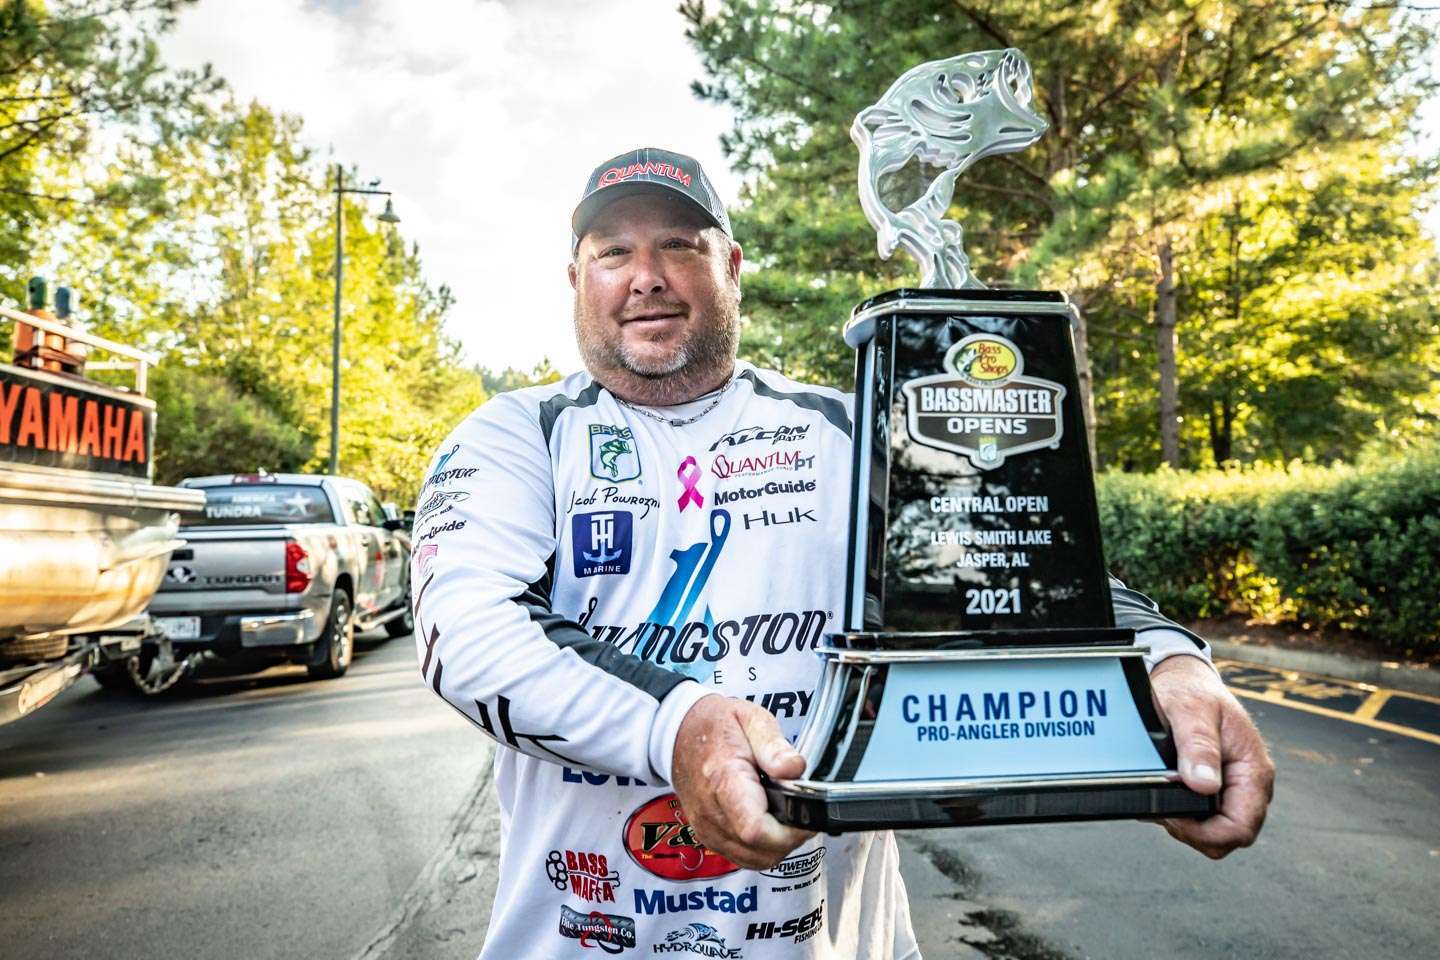 

<h4>Jacob Powroznik (3-1)</h4>
<p><b>North Prince George, Virginia </b><br />
Jacob Powroznik spent all of 2021 working vigorously to requalify for the Bassmaster Elite Series after a three-season hiatus. He accomplished that goal, and one of the major perks of his quest was the Classic berth he received for winning the Bassmaster Central Open on Smith Lake — his fifth major victory with B.A.S.S. It’s good news for Powroznik and for pro-fishing fans, but it might be bad news for the rest of this year’s field. This will be the veteran pro’s sixth Classic appearance. Two of those happened on Hartwell — in 2015 and 2018 — and both of those trips produced fifth-place finishes. Powroznik still laments that 2015 Classic when a weather-delayed takeoff on Day 1 kept him from fishing the “Best spot he’s ever found in a tournament — ever.” This is not your typical Opens Classic qualifier. He’s battle-tested and knows where to find them on Hartwell.<br />
” class=”wp-image-567925″ width=”1440″ height=”960″/><figcaption>
<h4>Jacob Powroznik (3-1)</h4>
<p><b>North Prince George, Virginia </b><br />
Jacob Powroznik spent all of 2021 working vigorously to requalify for the Bassmaster Elite Series after a three-season hiatus. He accomplished that goal, and one of the major perks of his quest was the Classic berth he received for winning the Bassmaster Central Open on Smith Lake — his fifth major victory with B.A.S.S. It’s good news for Powroznik and for pro-fishing fans, but it might be bad news for the rest of this year’s field. This will be the veteran pro’s sixth Classic appearance. Two of those happened on Hartwell — in 2015 and 2018 — and both of those trips produced fifth-place finishes. Powroznik still laments that 2015 Classic when a weather-delayed takeoff on Day 1 kept him from fishing the “Best spot he’s ever found in a tournament — ever.” This is not your typical Opens Classic qualifier. He’s battle-tested and knows where to find them on Hartwell.<br />
</figcaption></figure>
<div class=